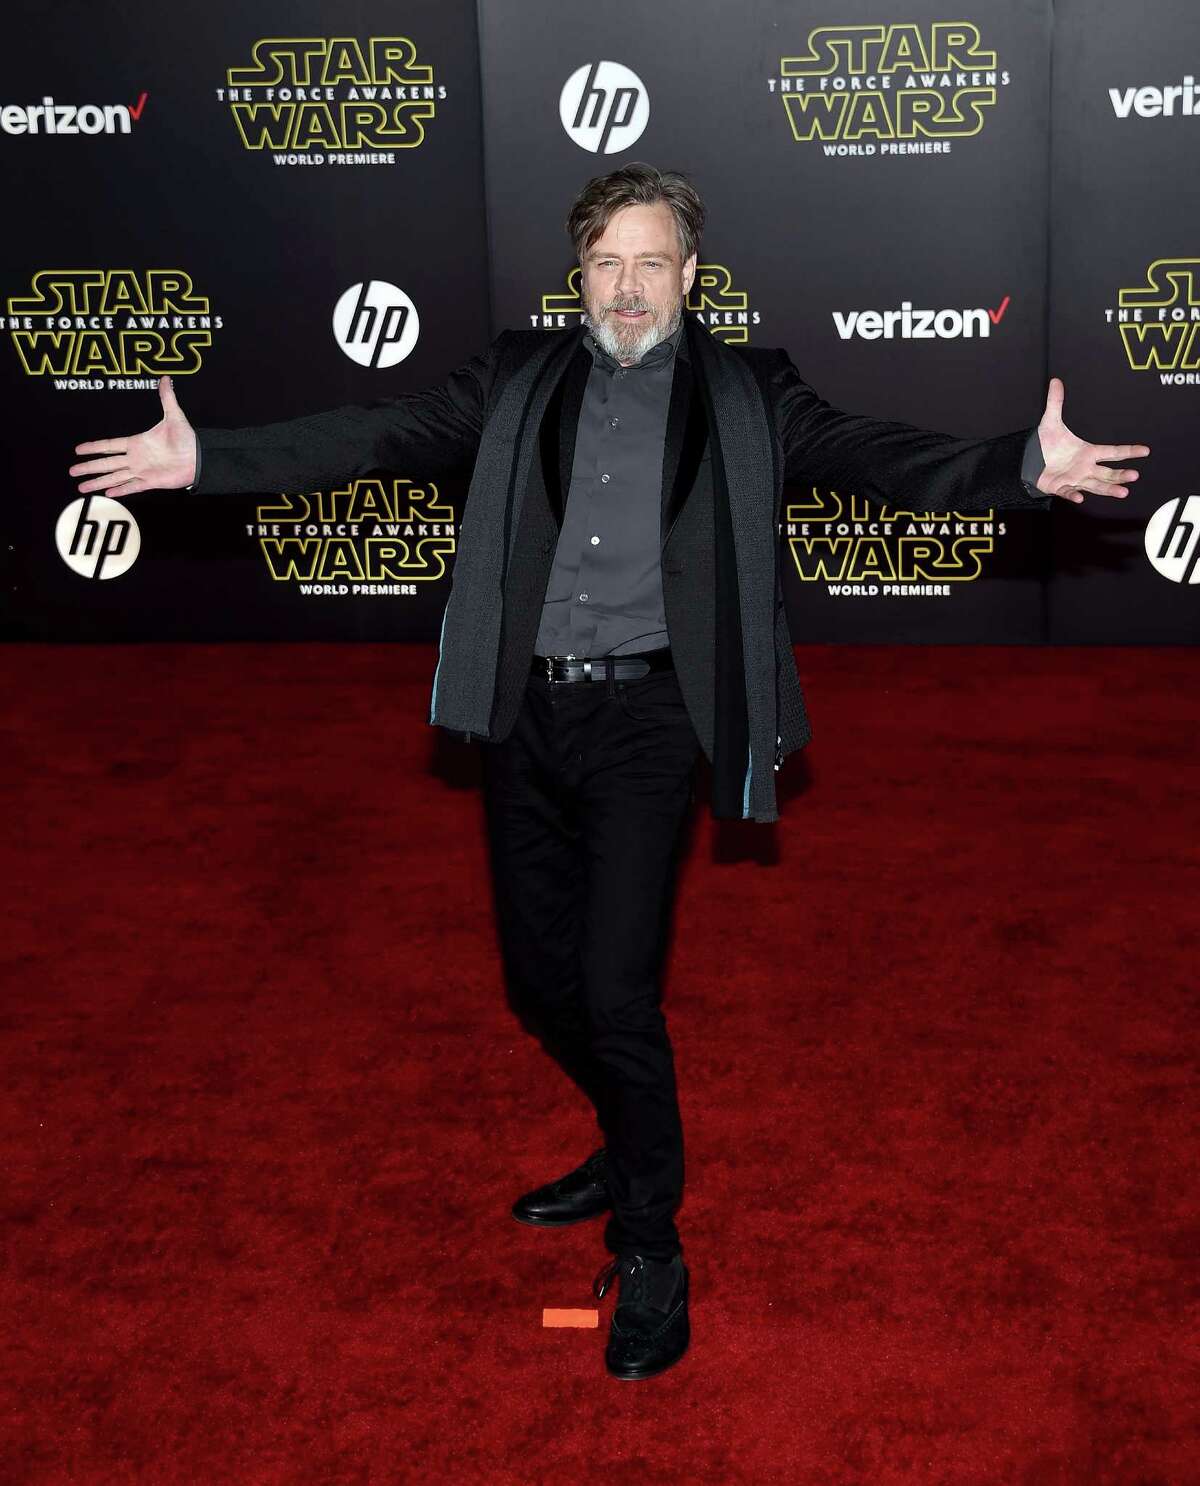 'Star Wars The Force Awakens' star Mark Hamill shows off dramatic